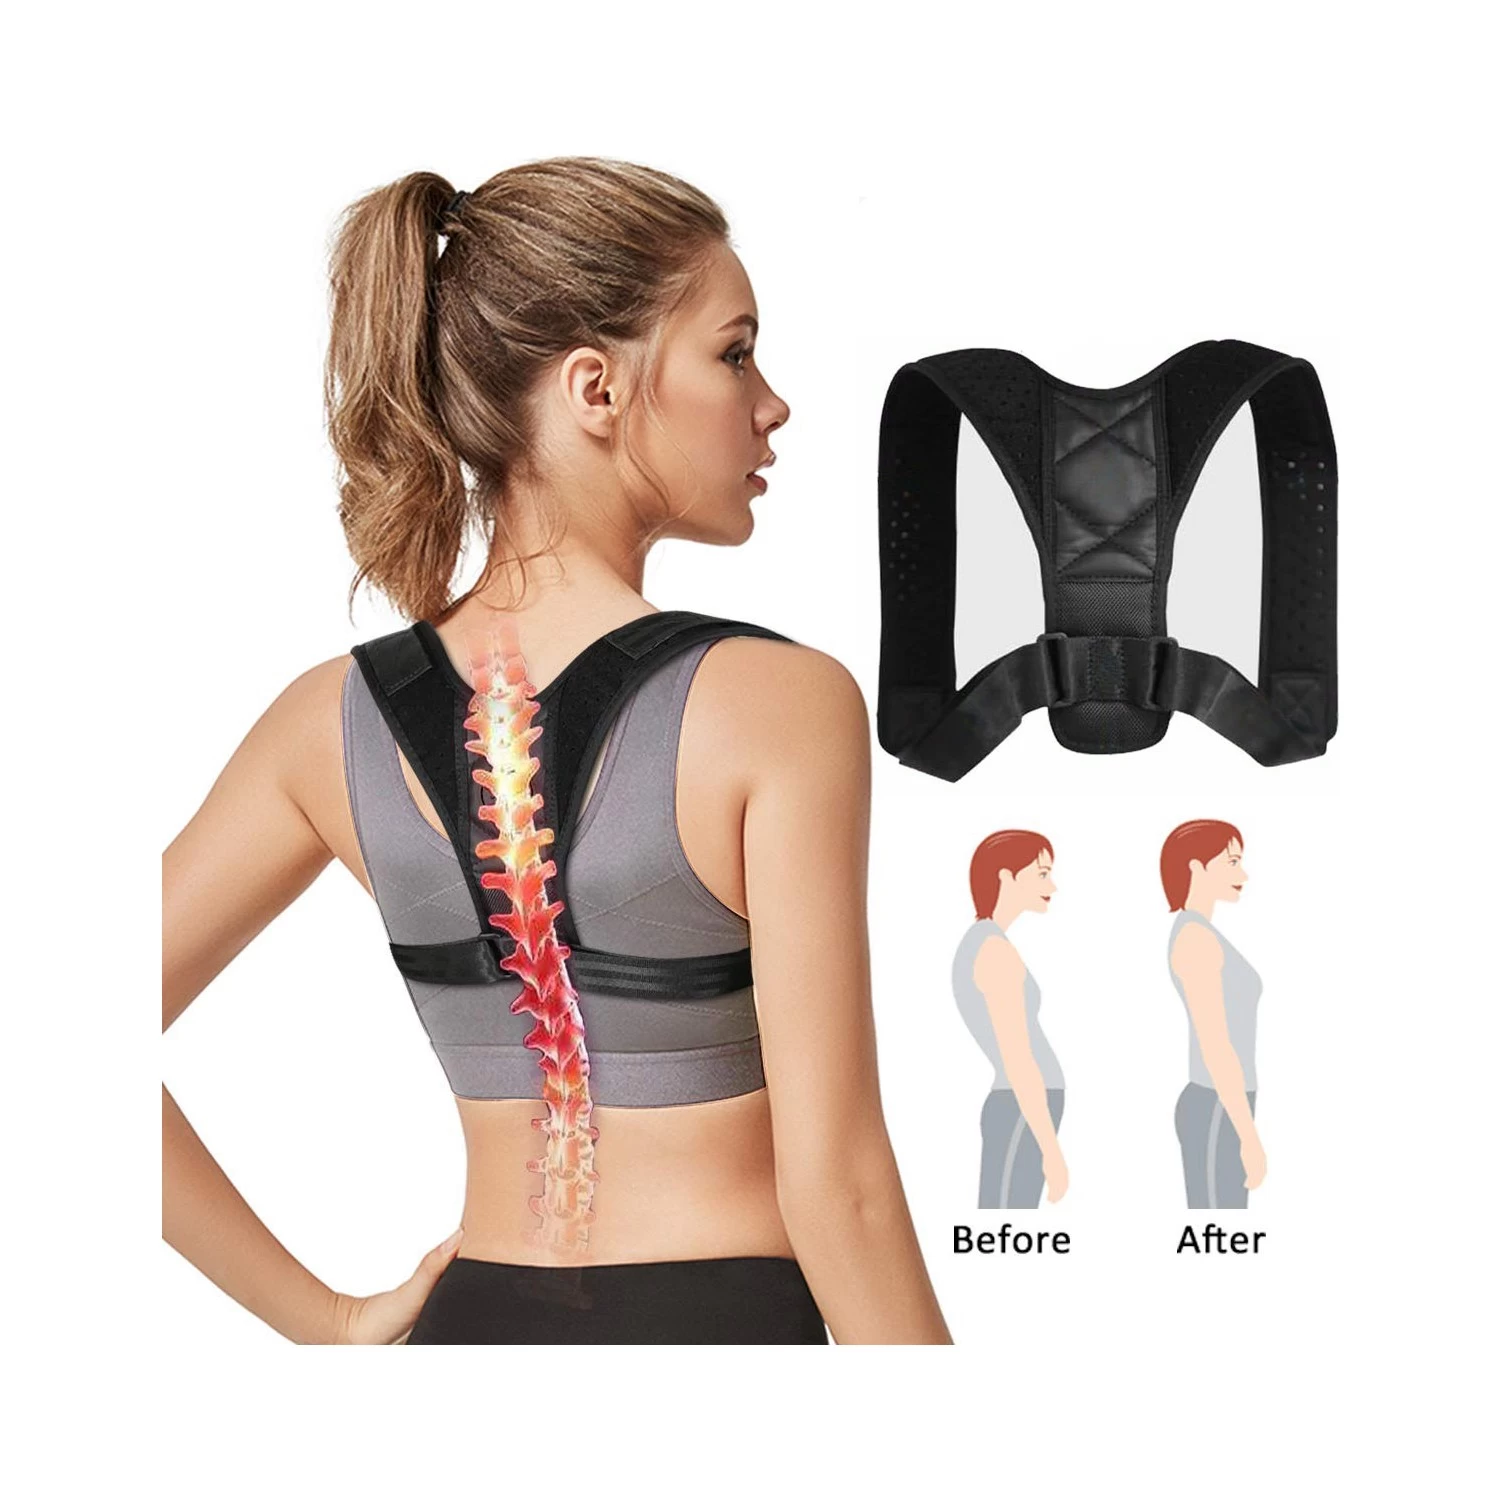 Things to Know About Scoliosis Corset